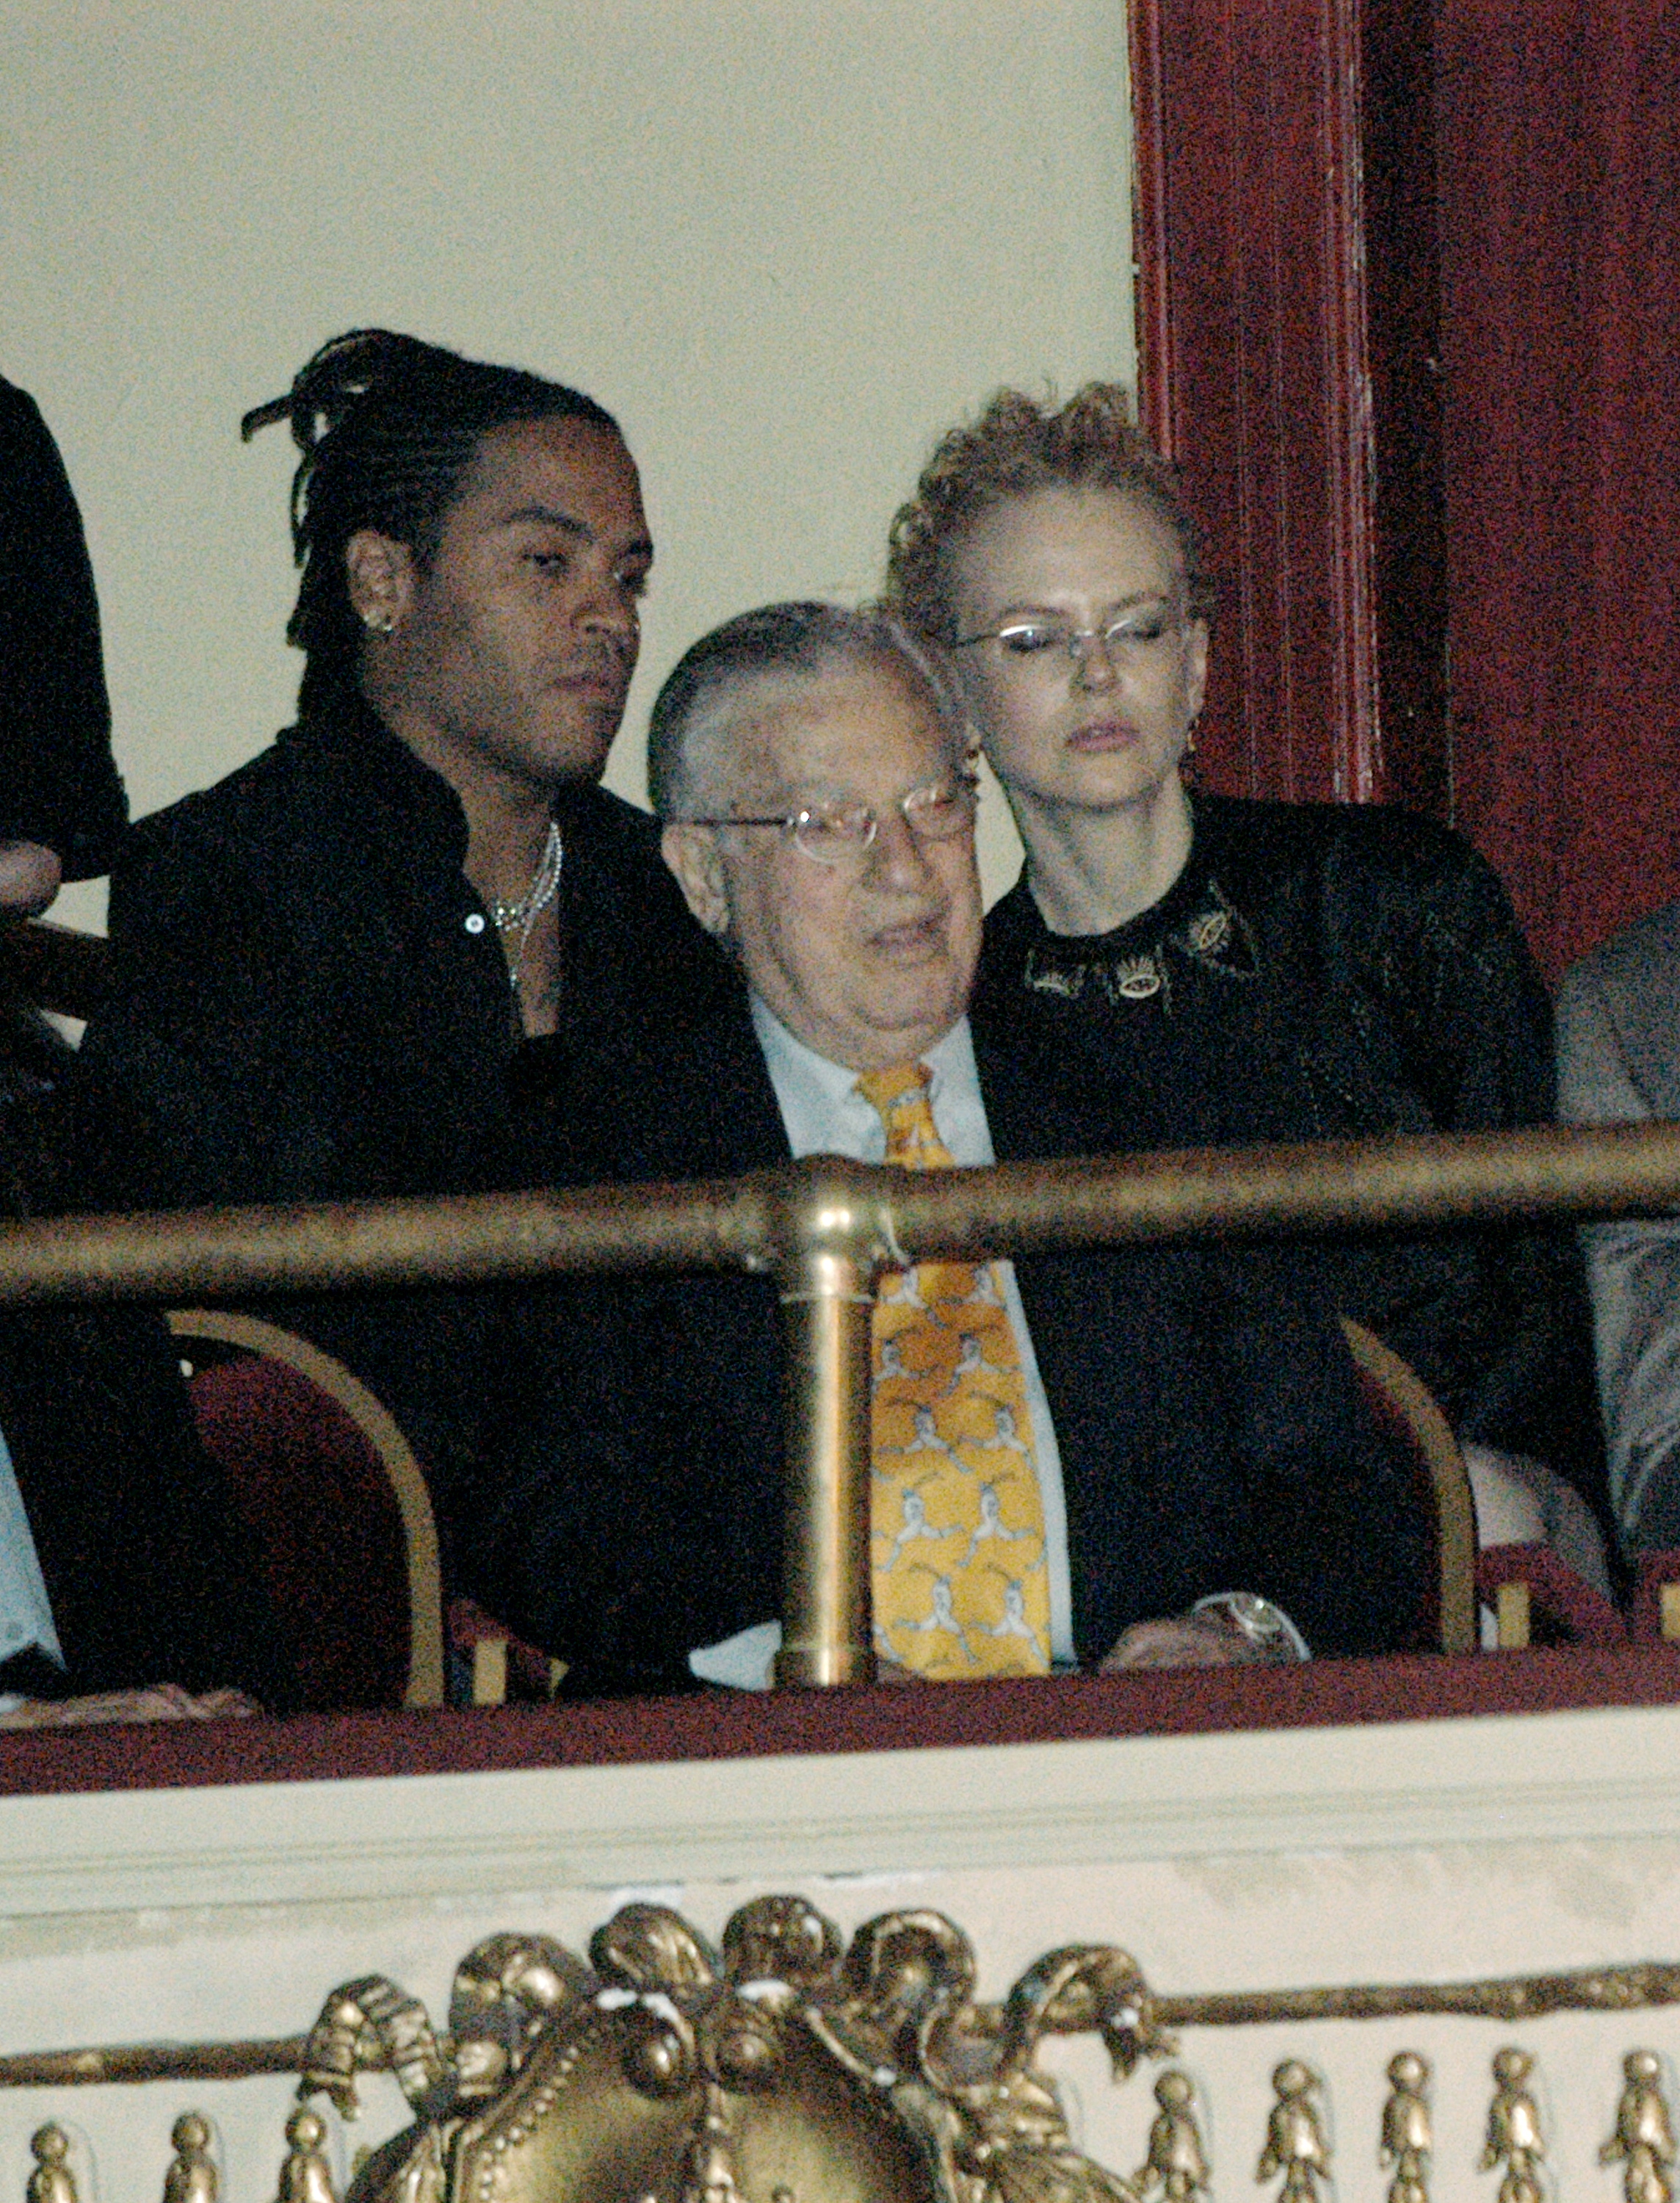 Lenny Kravitz and Nicole Kidman at the Apollo Theater on September 21, 2003  | Source: Getty Images